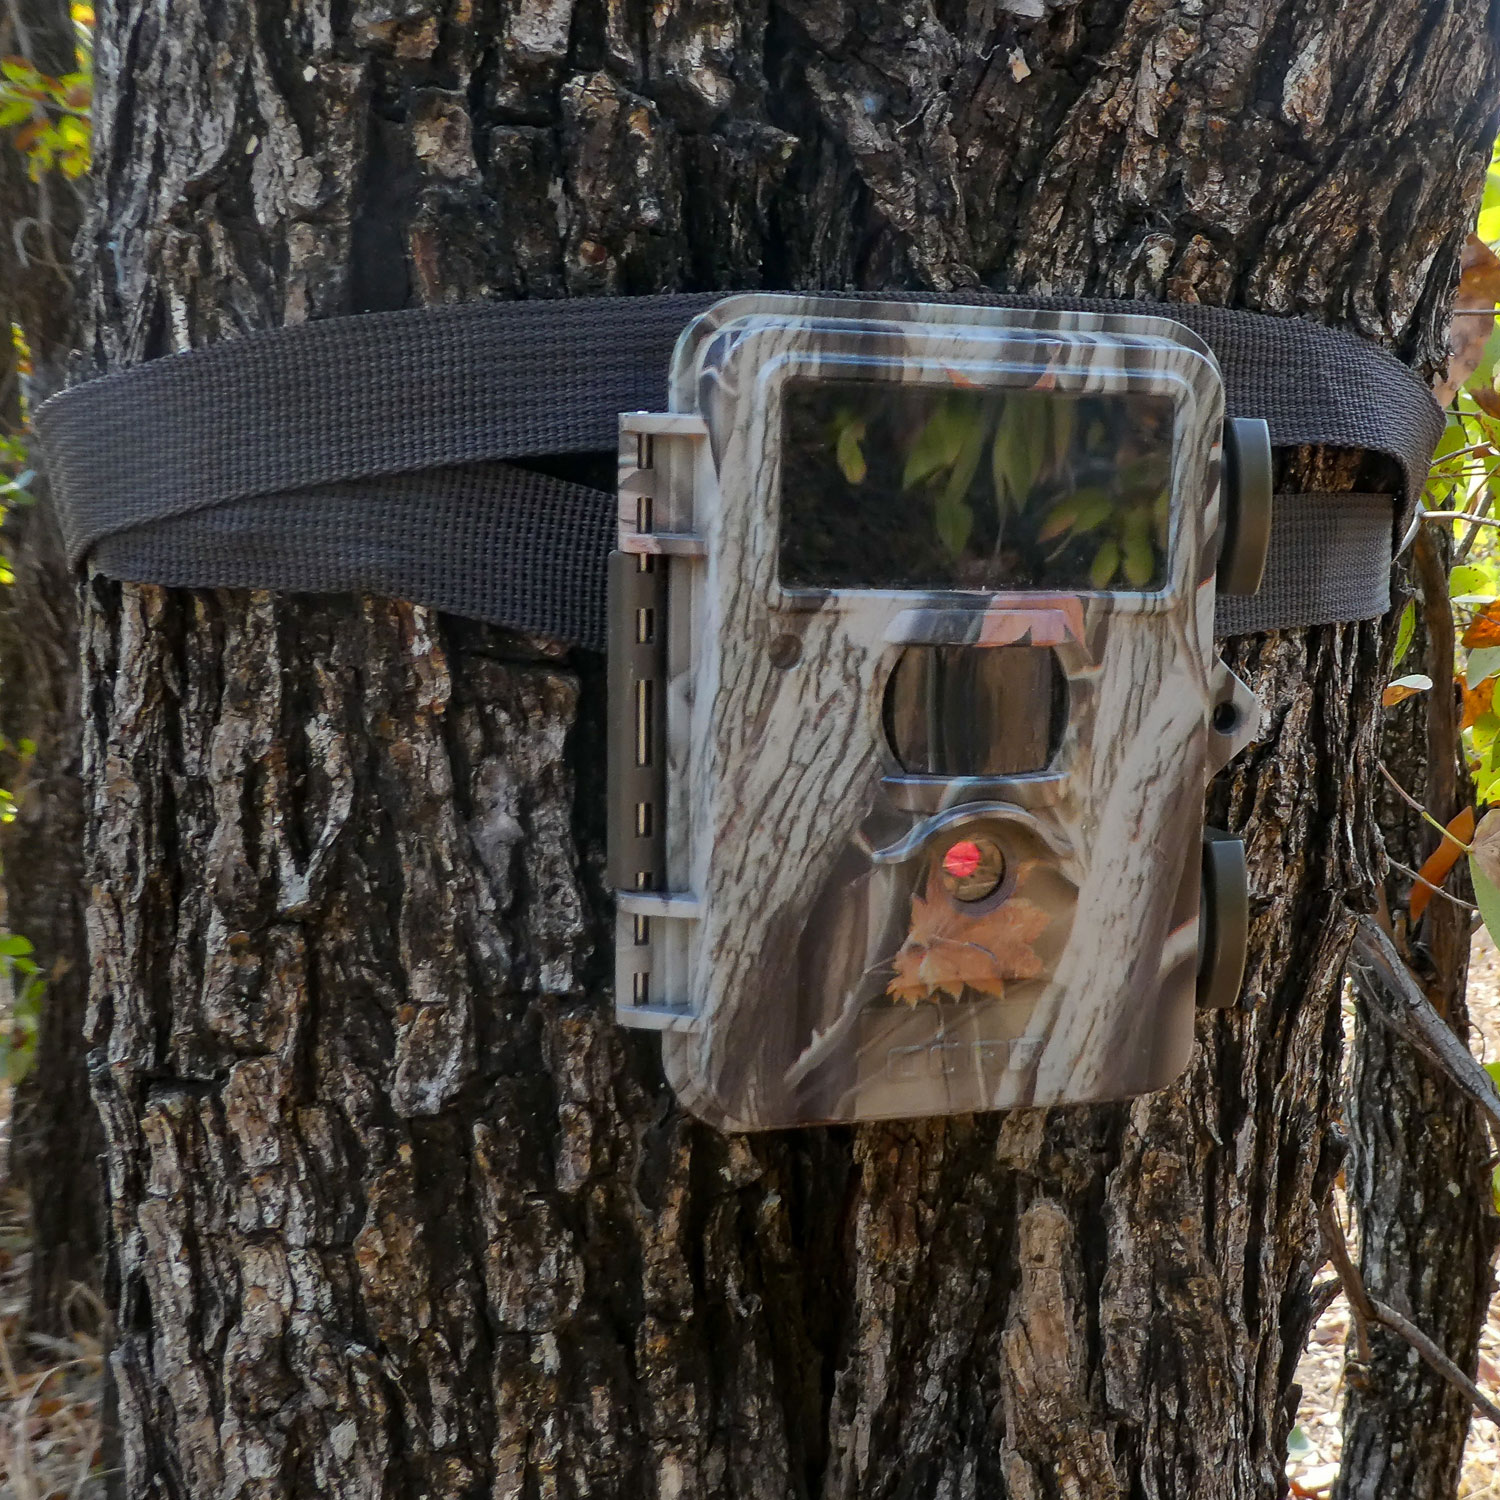 Inventory by means of camera traps